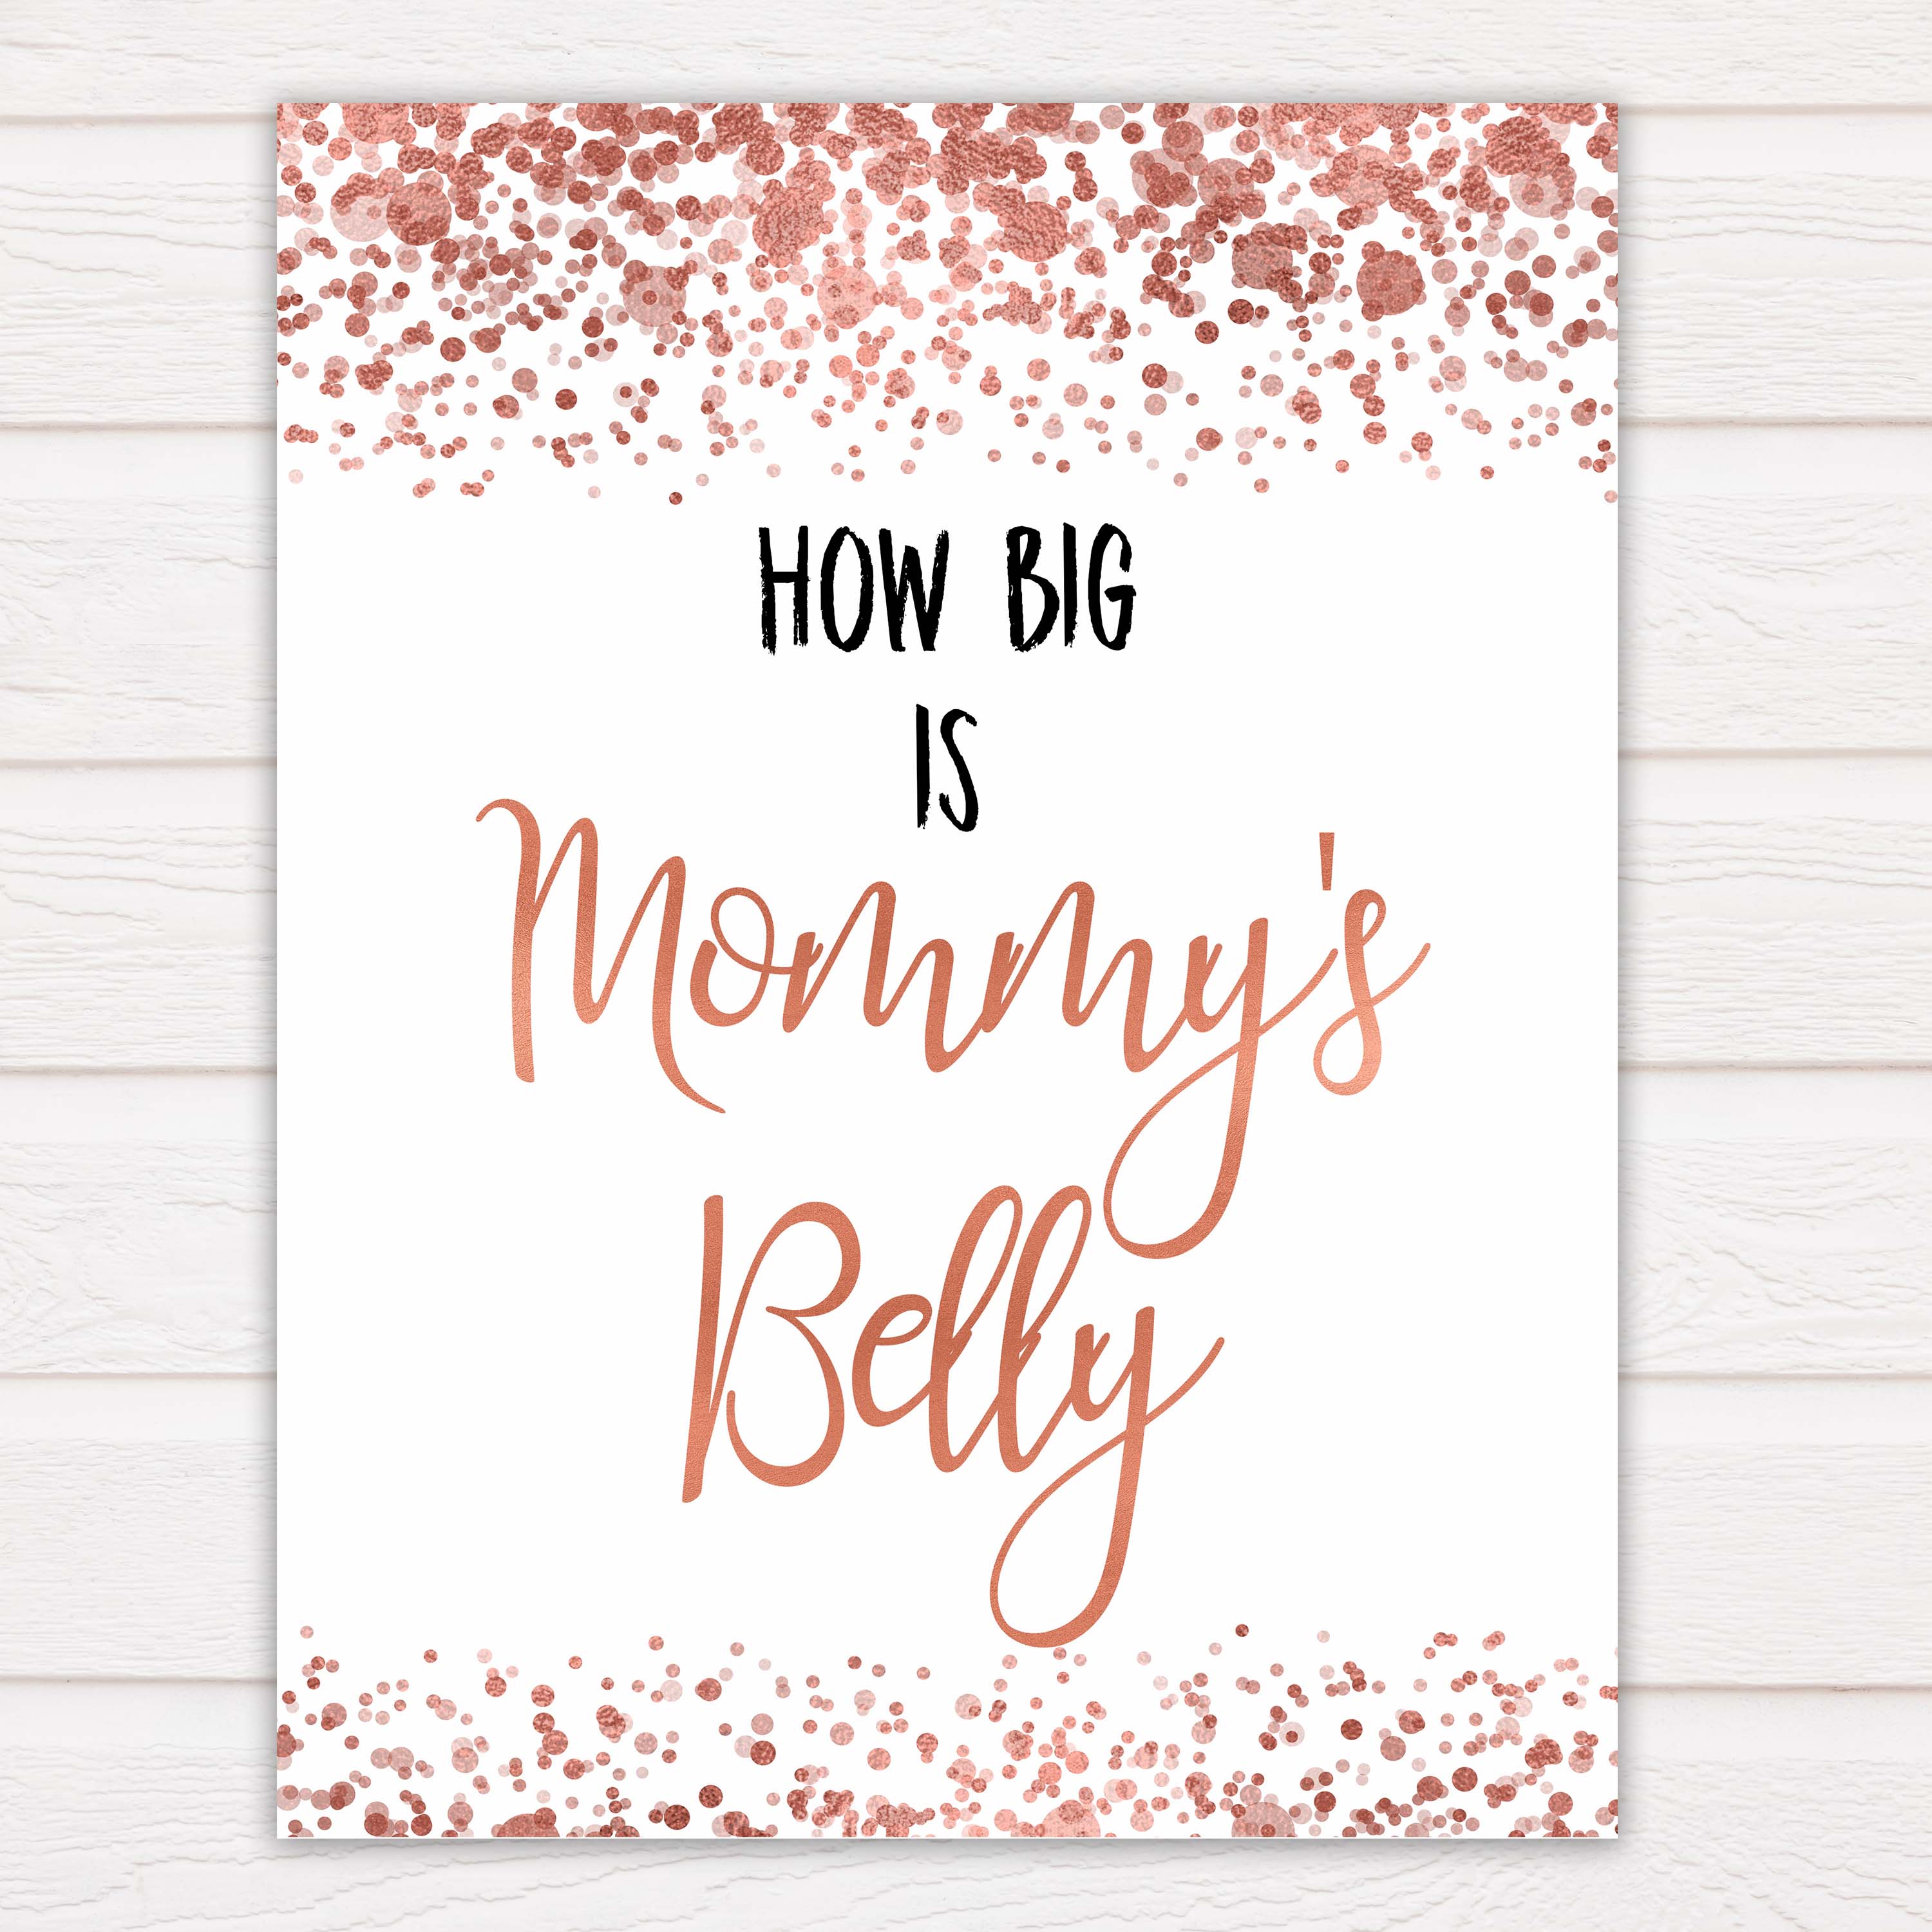 How Big Is Mommy's Belly in Rose Gold, Mommys Belly Game, Baby Shower Games, Rose Gold Baby Games, Guess Mommys Belly, Funny Baby Game, printable baby shower games